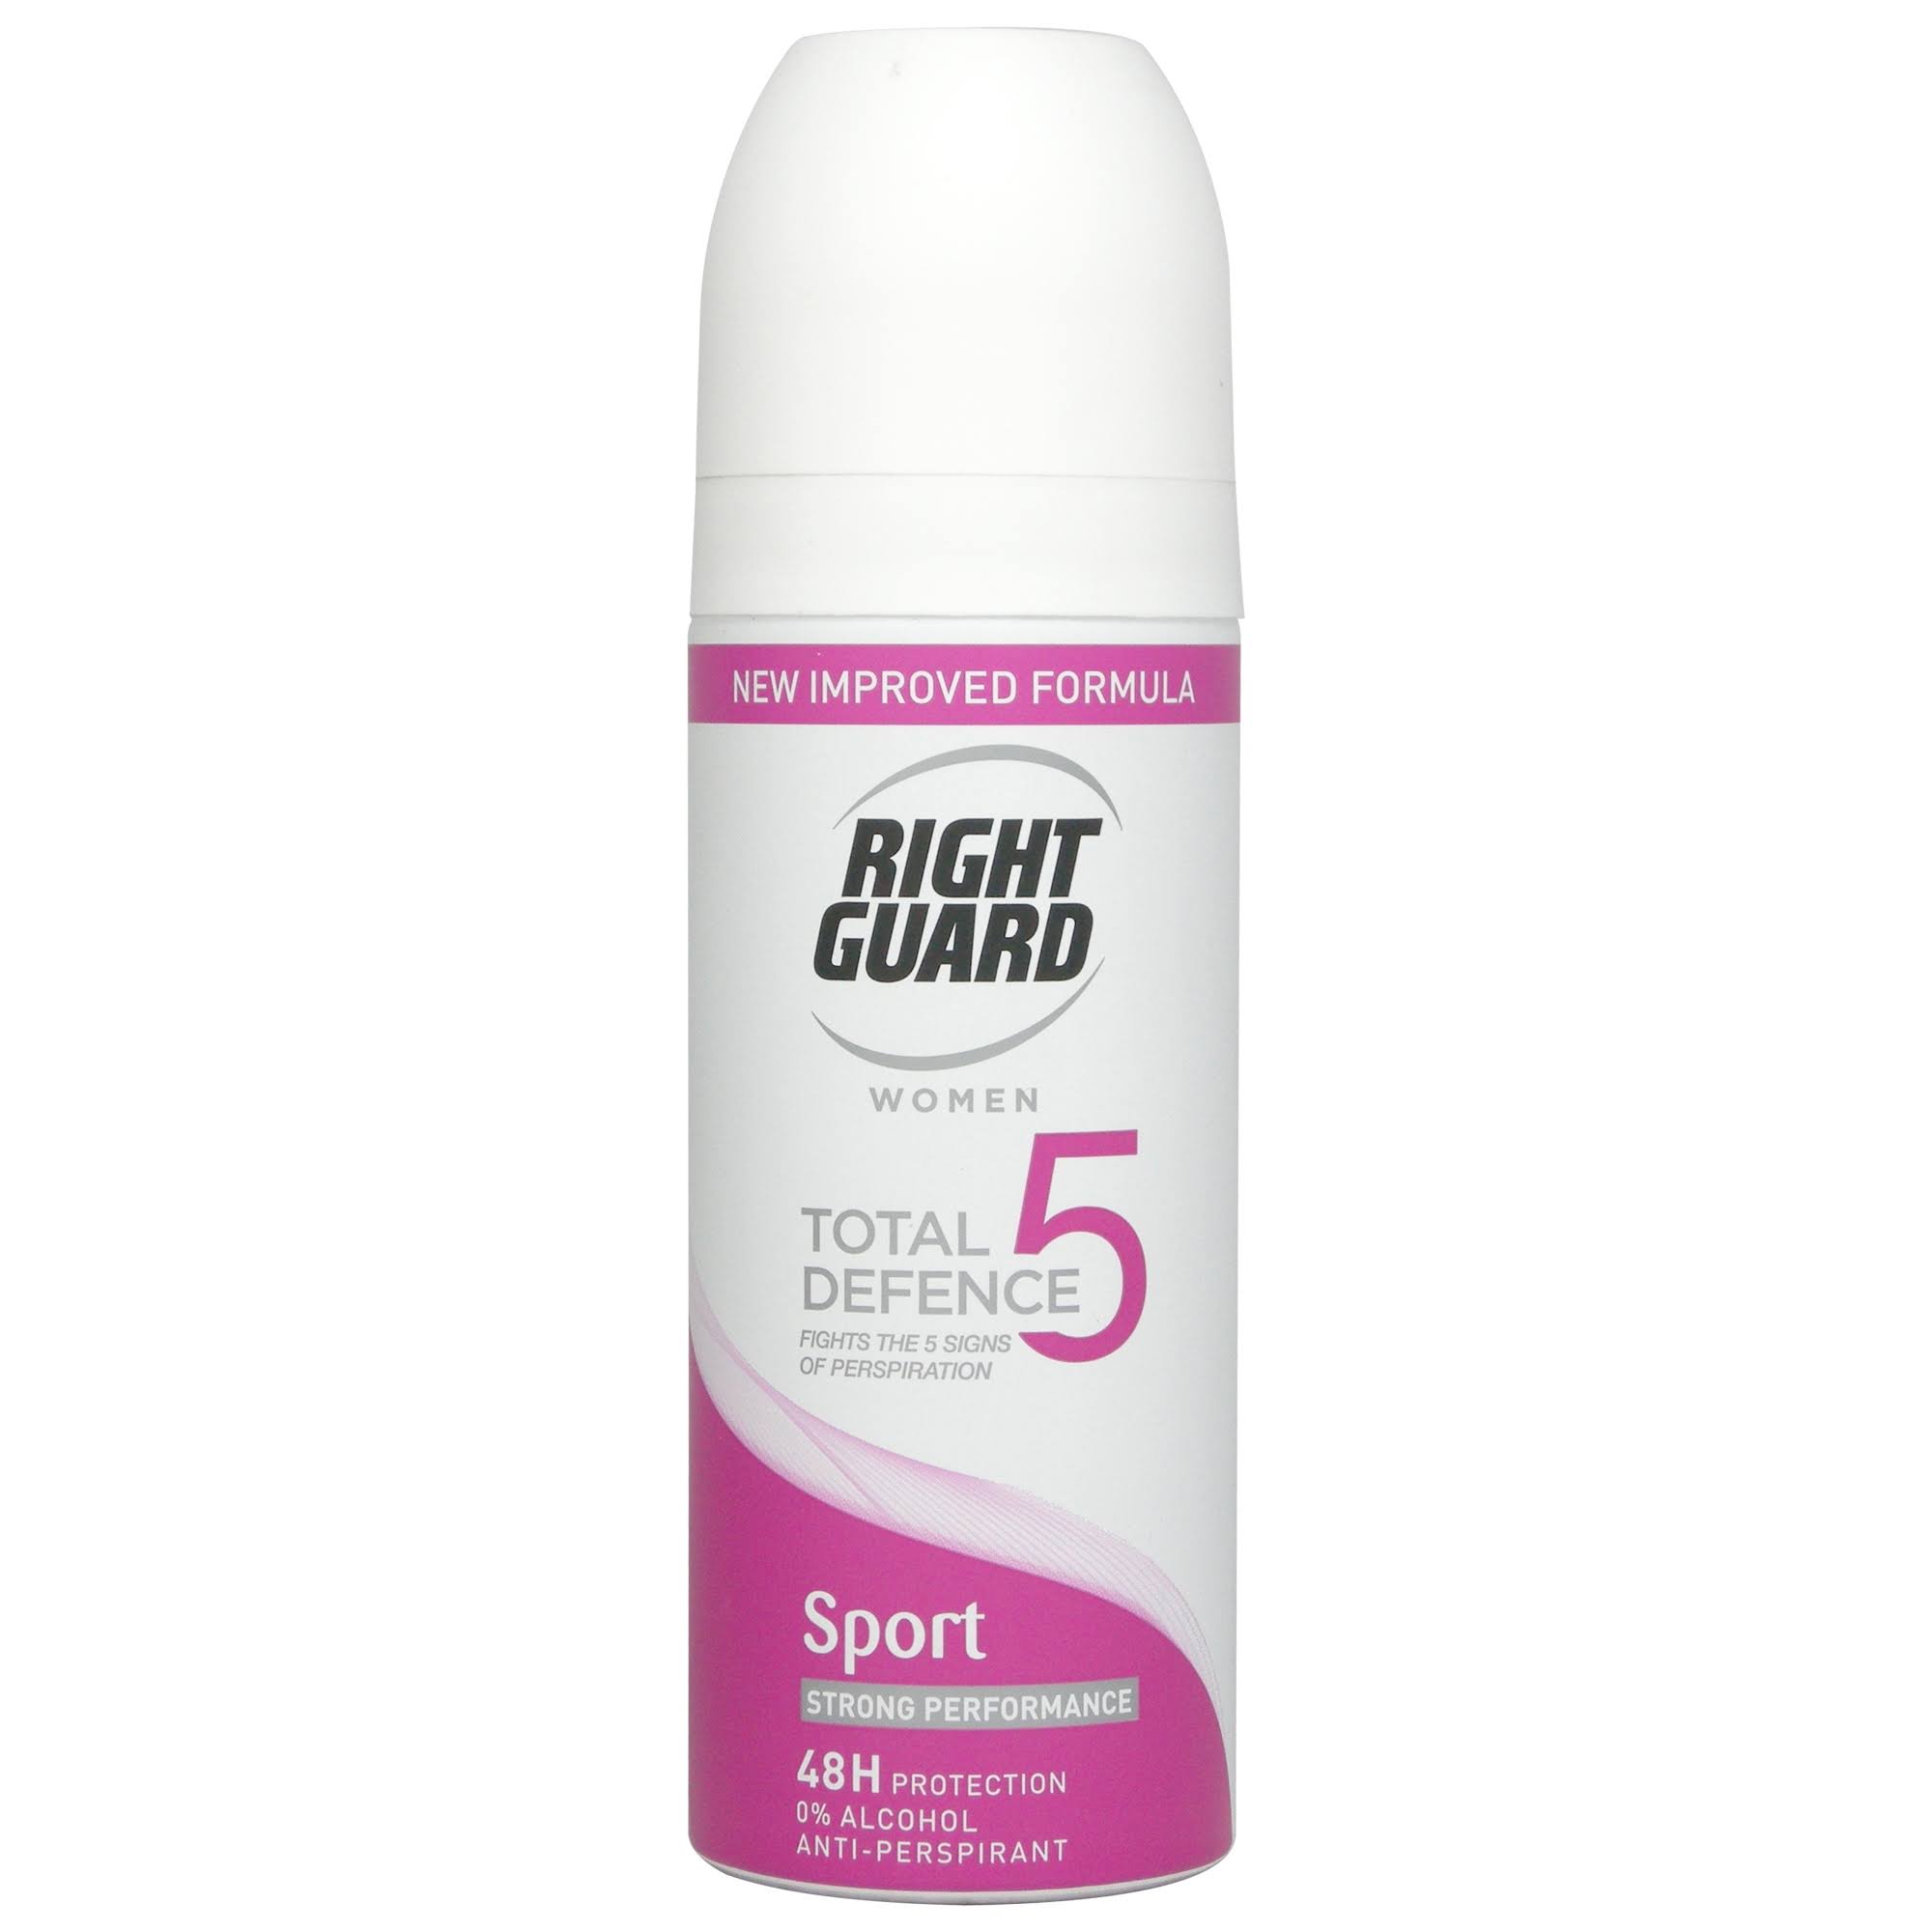 Right Guard Women Total Defence 5 48h Protection Anti-Perspirant - Sport, 150ml